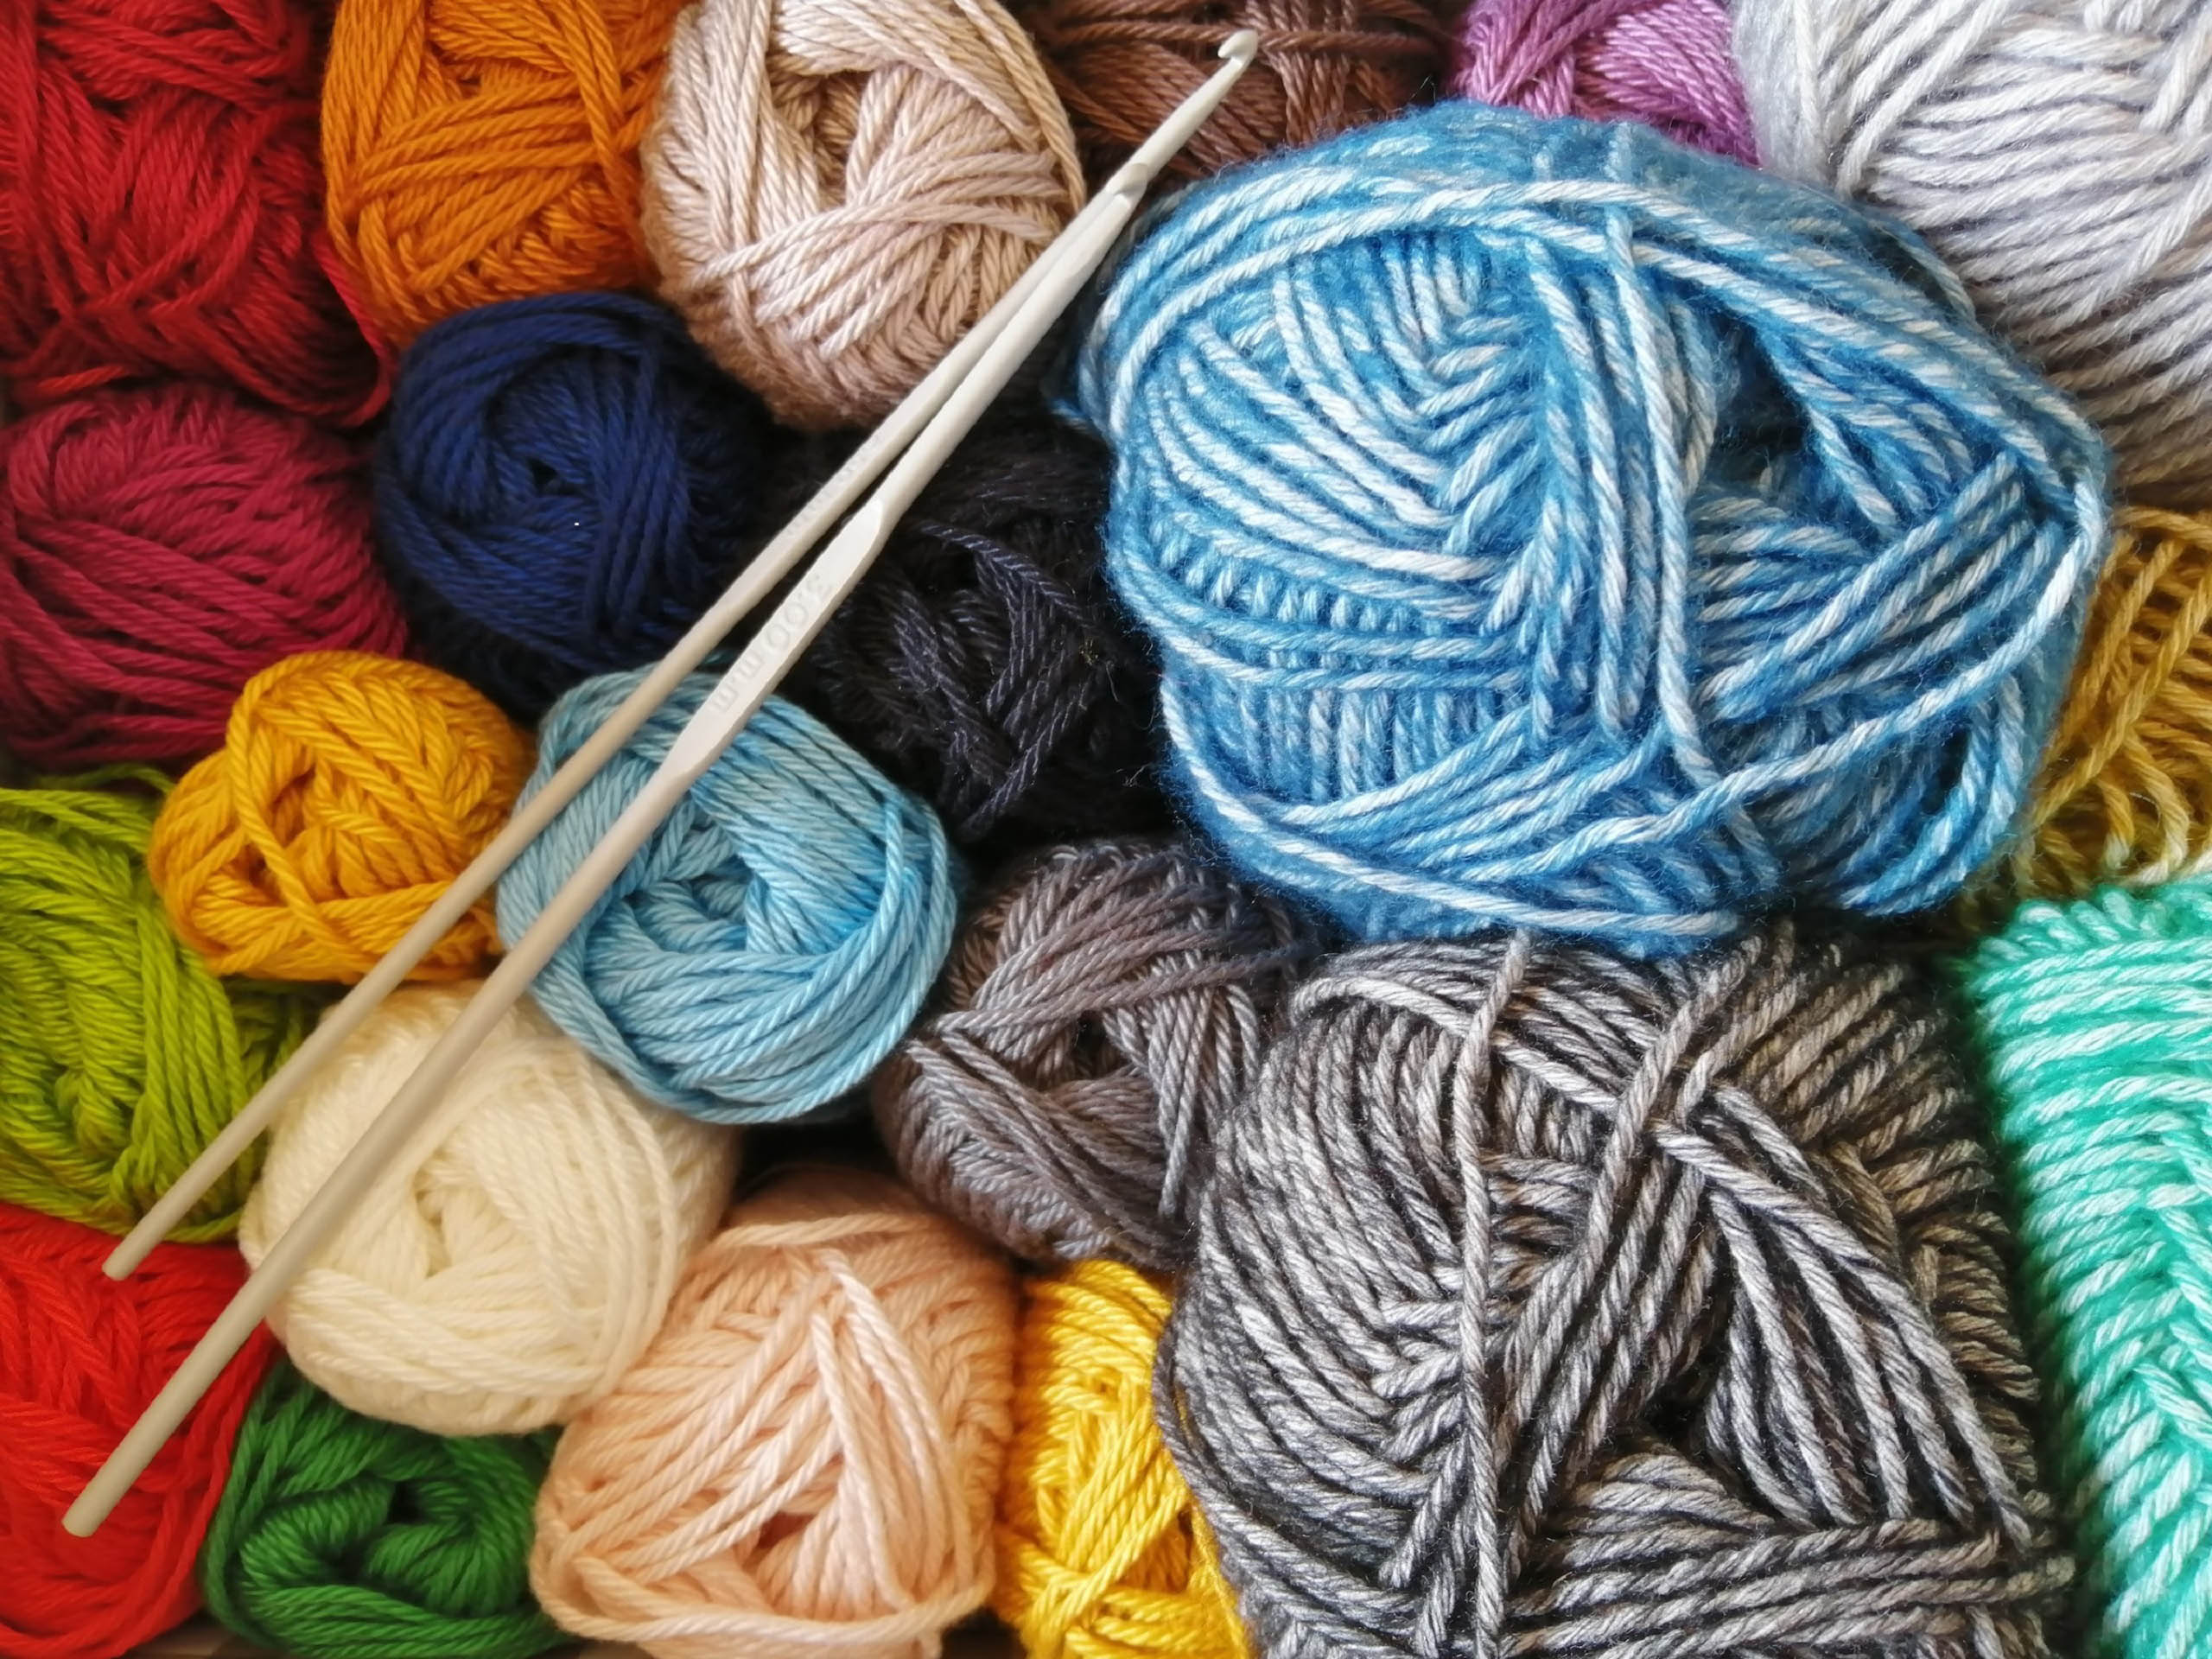 Miranda Library invites knitters and would-be knitters to join fellow stitchers to this regular knitting group. All ages and levels of ability are welcome in a relaxed, social setting.